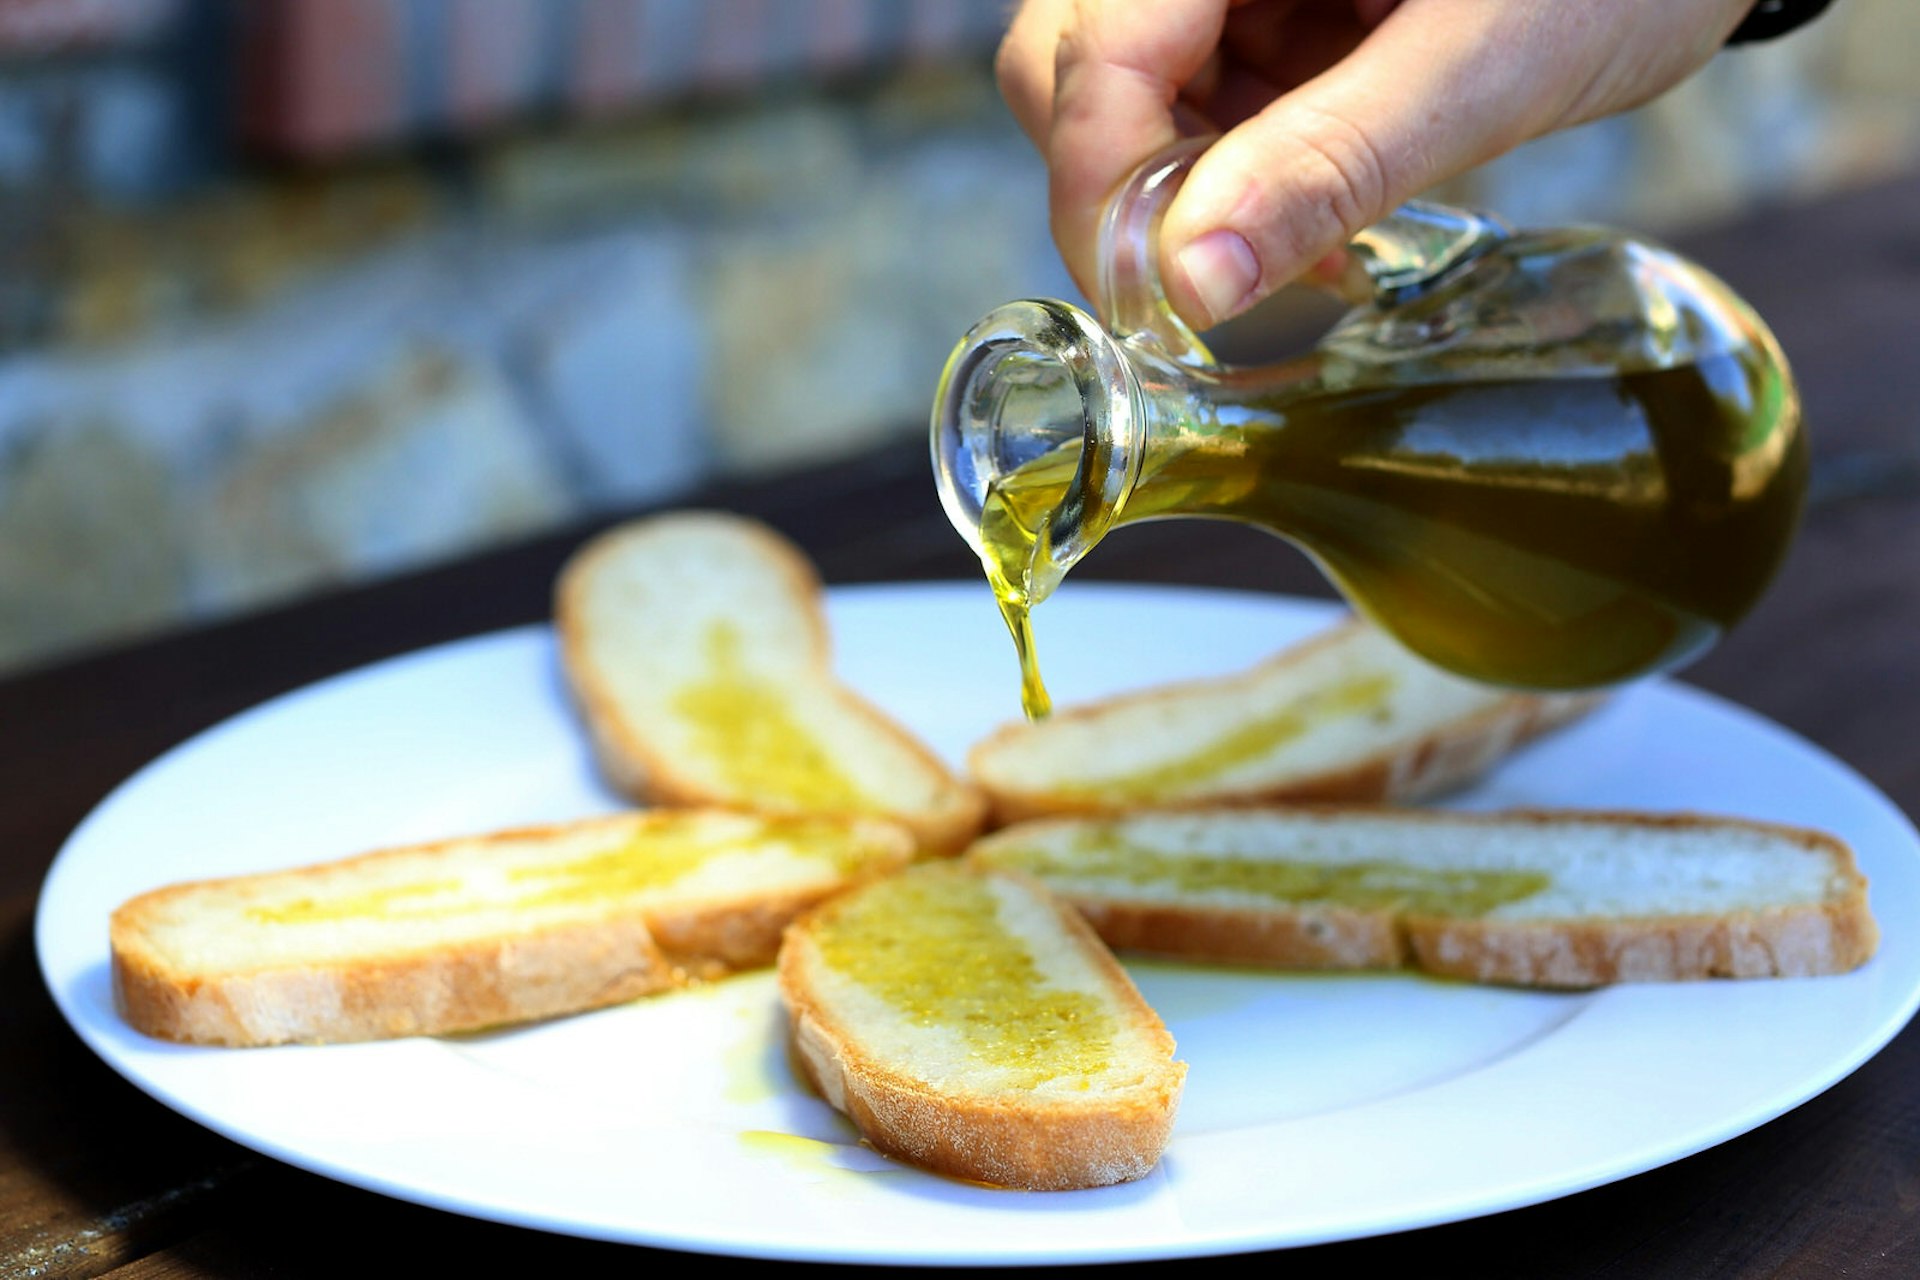 Features - Olive Oil Production Season In Tuscany